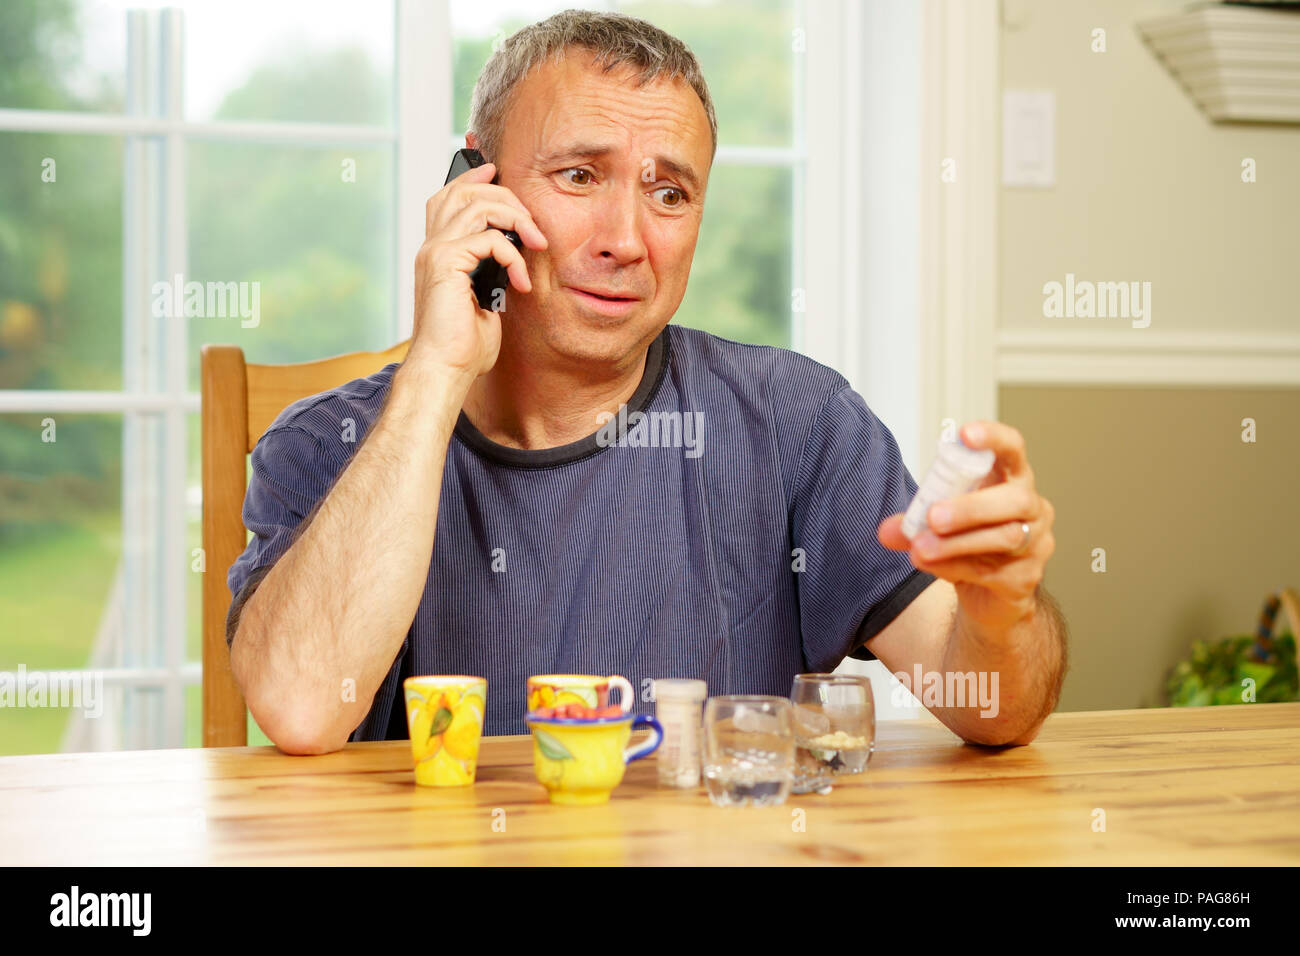 Caucasian man, alone, sit at a table, day, worrying about the pills he is supposed to take. Stock Photo